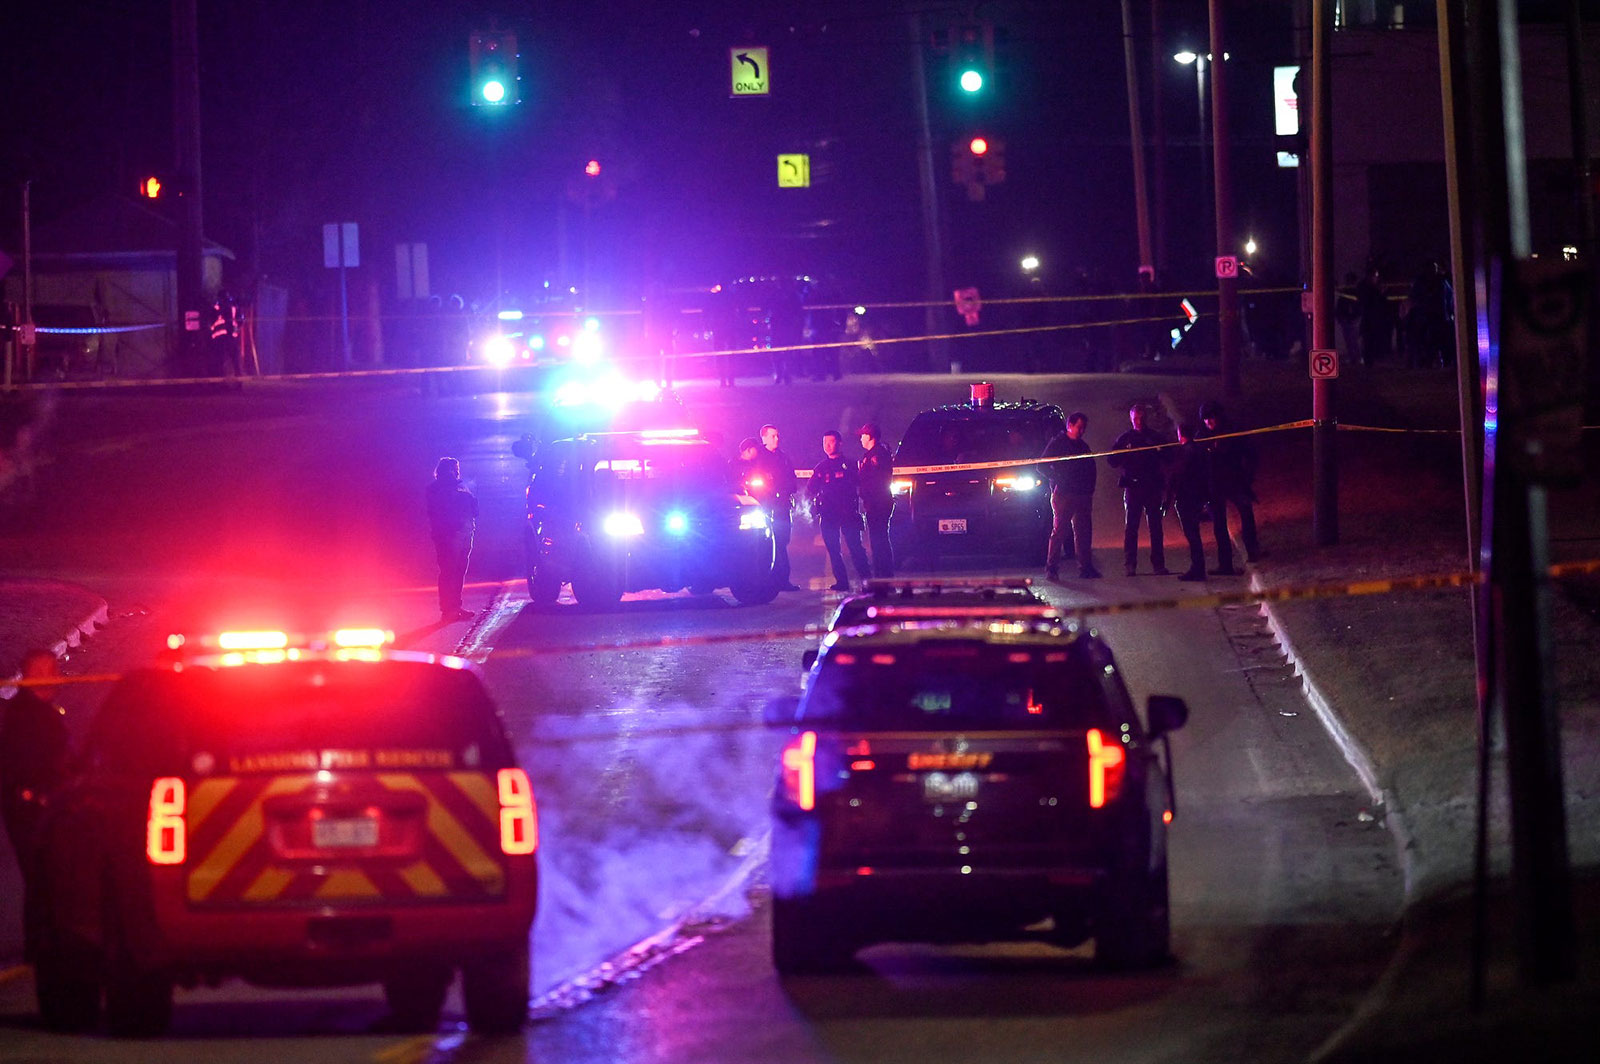 Police work the scene after midnight where a man suspected of a shooting on the Michigan State University campus died from a self-inflicted gunshot wound.